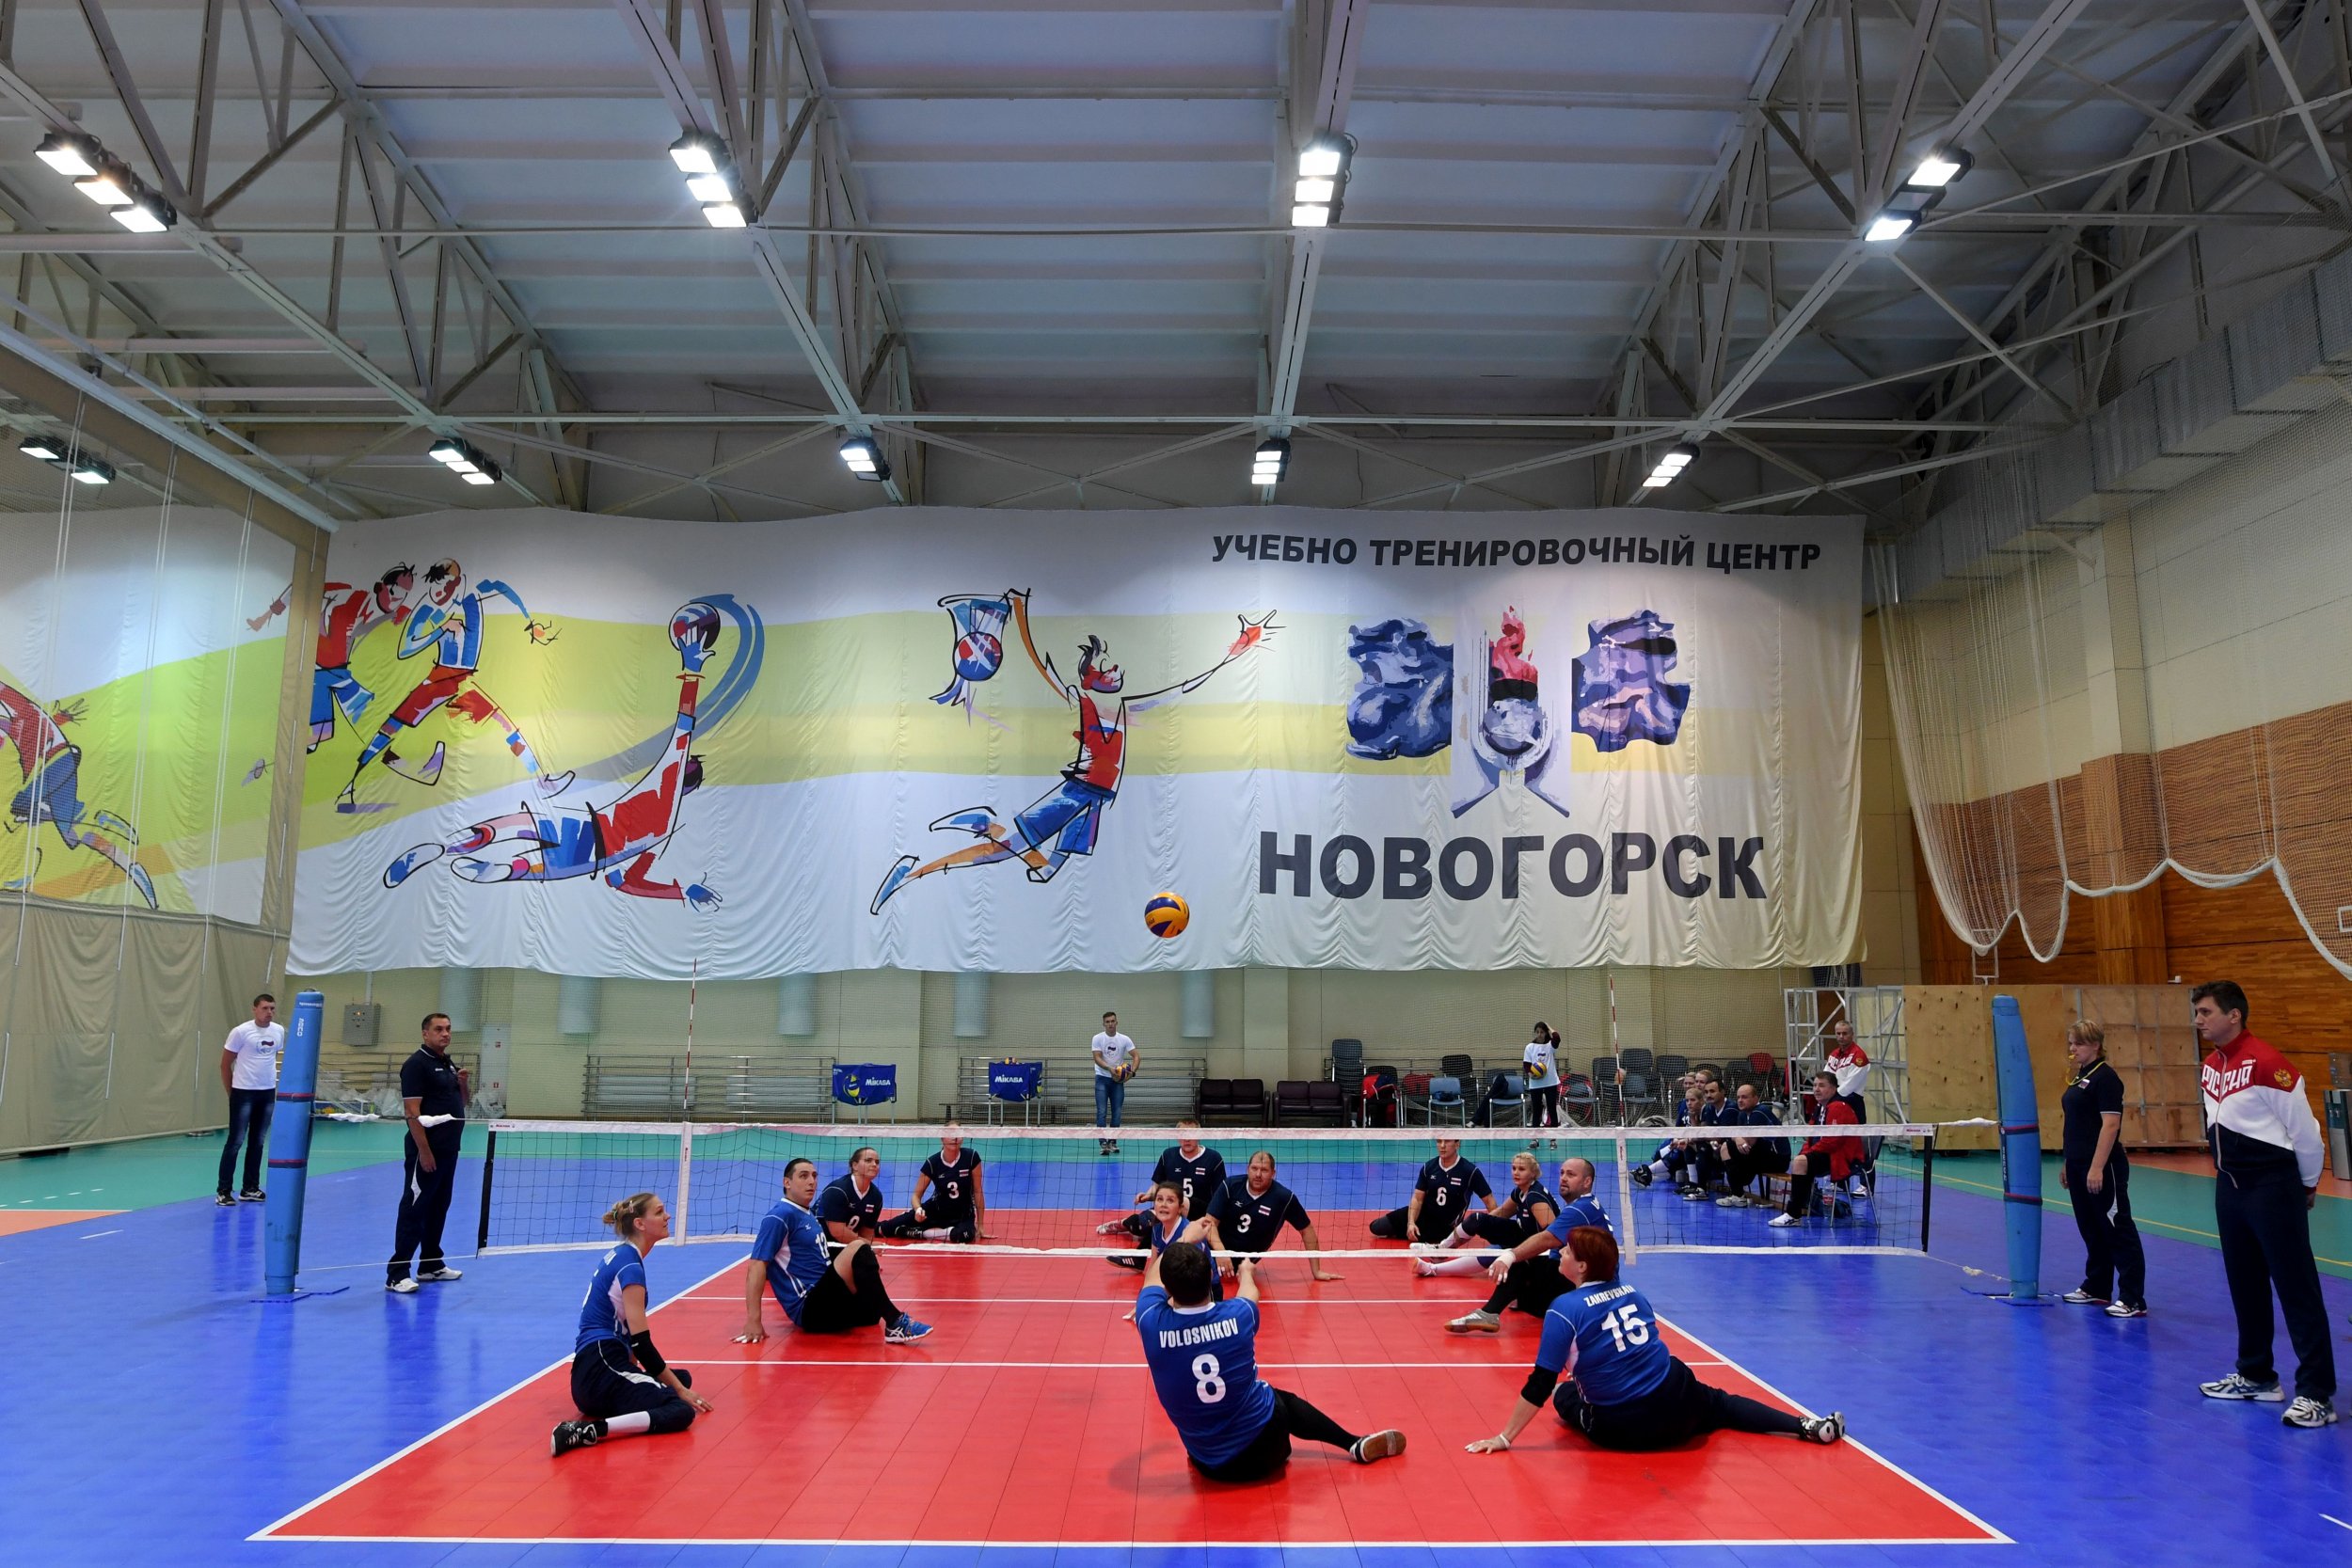 Russia's Paralympians compete in a volleyball game at the Novogorsk Training Center, outside Moscow.